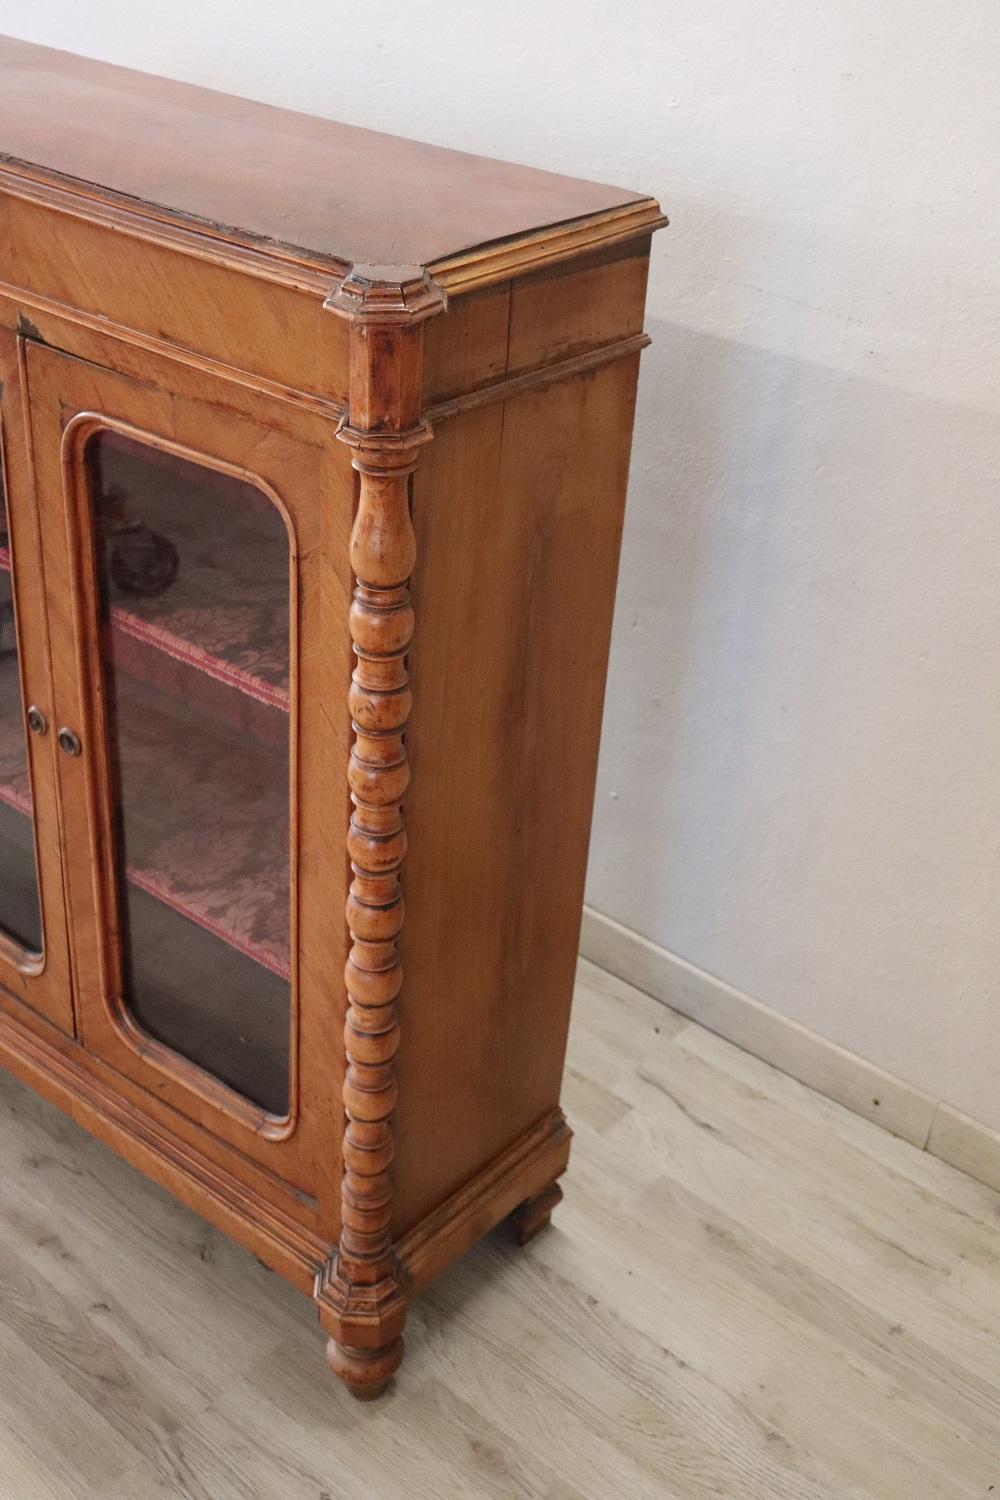 Elegant walnut antique Louis Philippe vitrine. Particular shape on the front with turned decoration on the sides. Interior lined in elegant red damask fabric and equipped with two shelves. Perfect for displaying your precious objects perfect